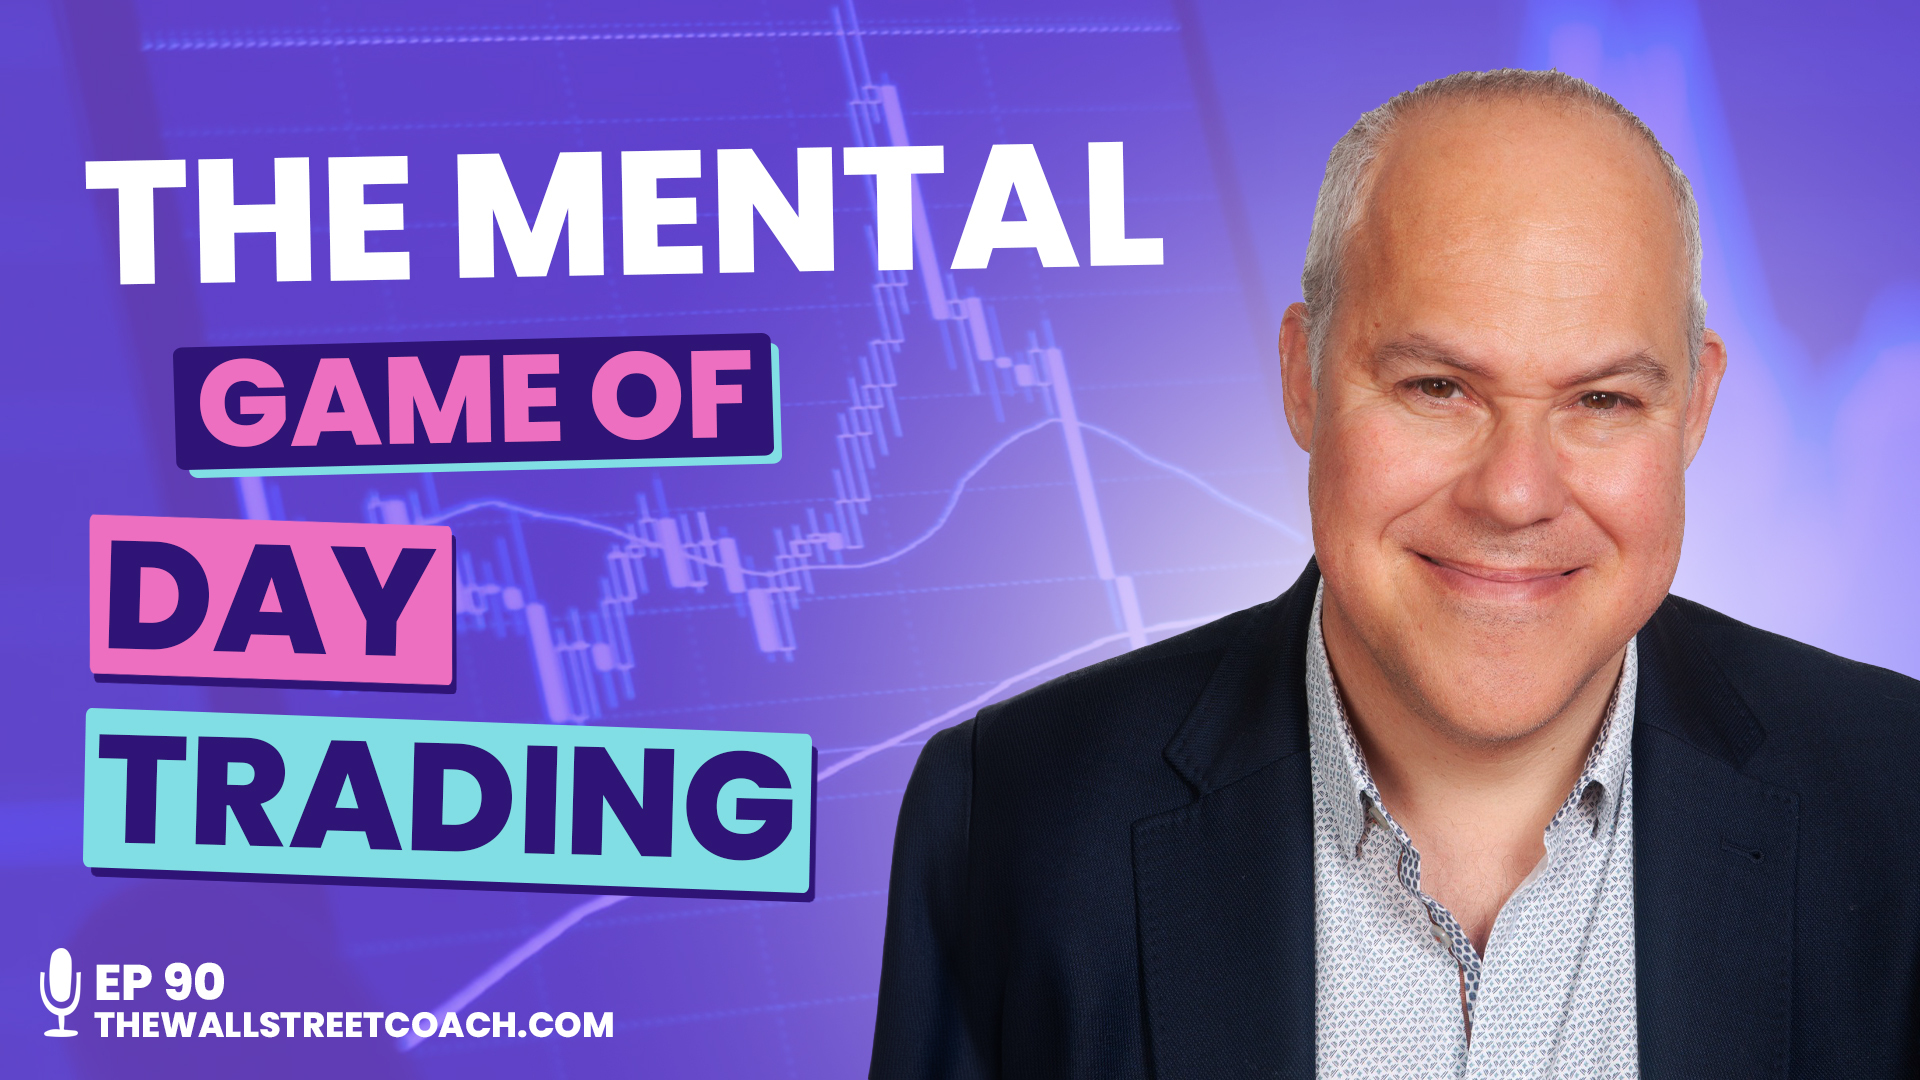 Ep 90: Don’t Let Your Mind Sabotage Your Trading: Master the Mental Game of Trading with Steven Goldstein